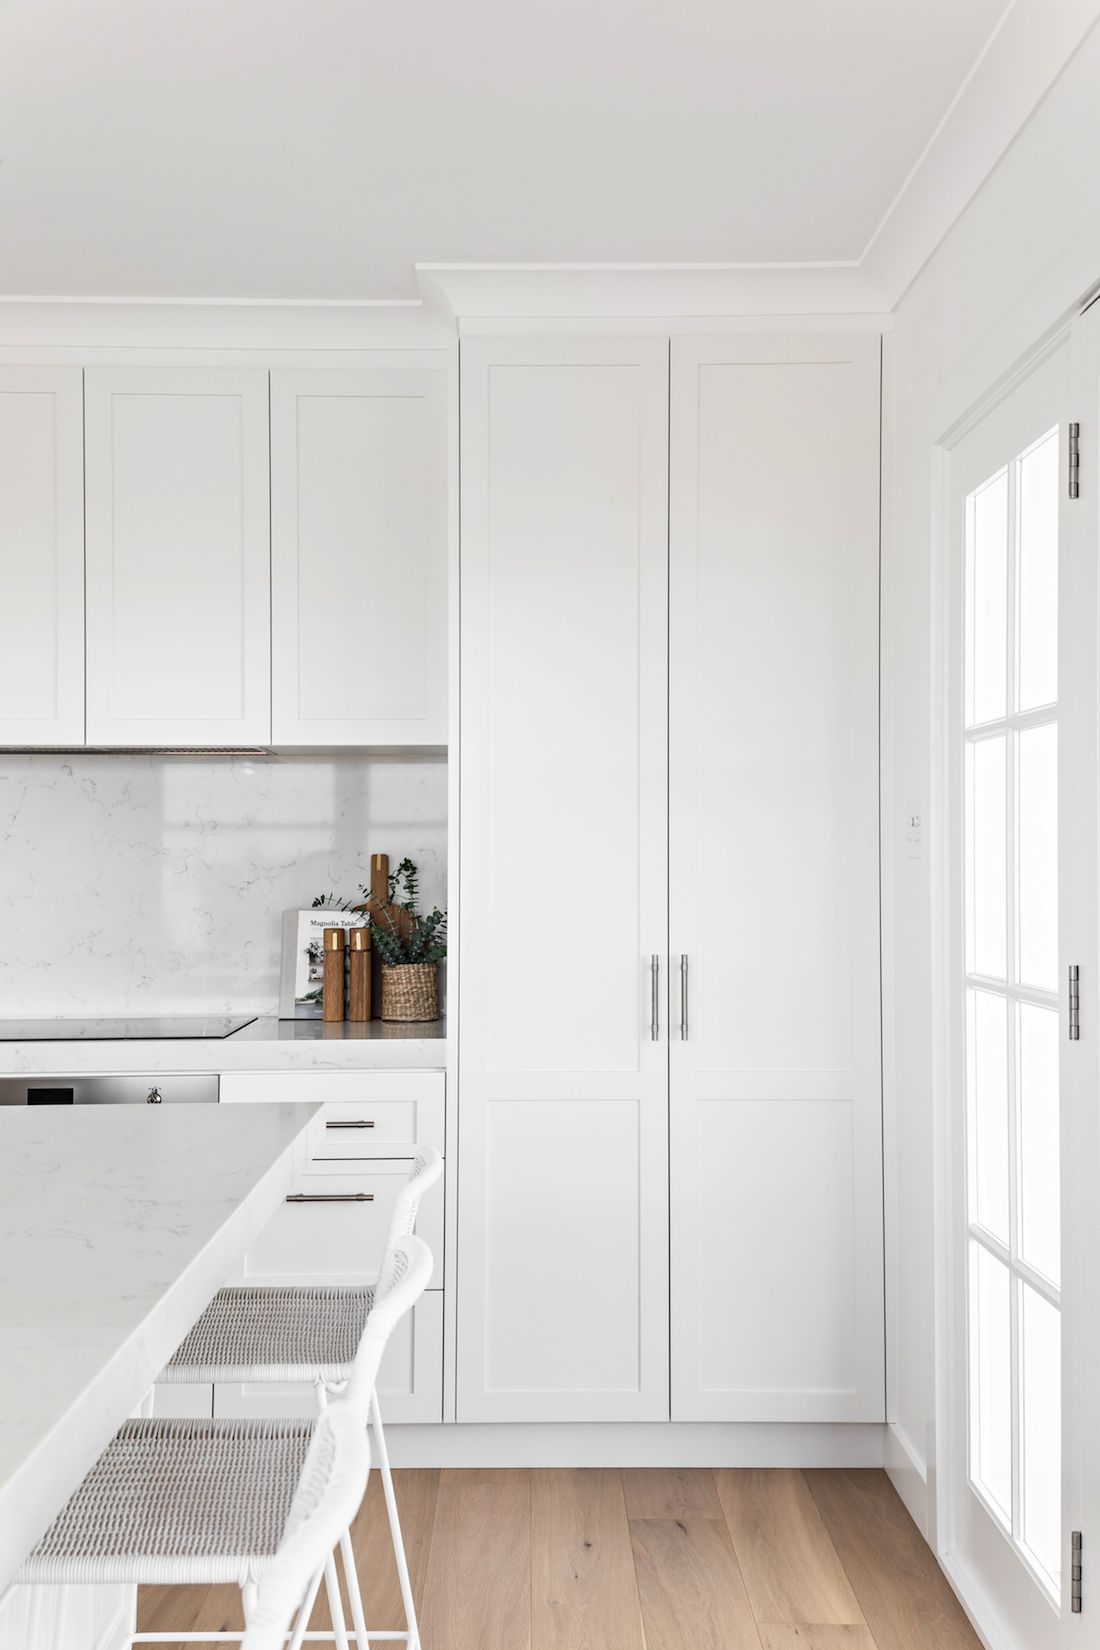 All white kitchen with timber flooring